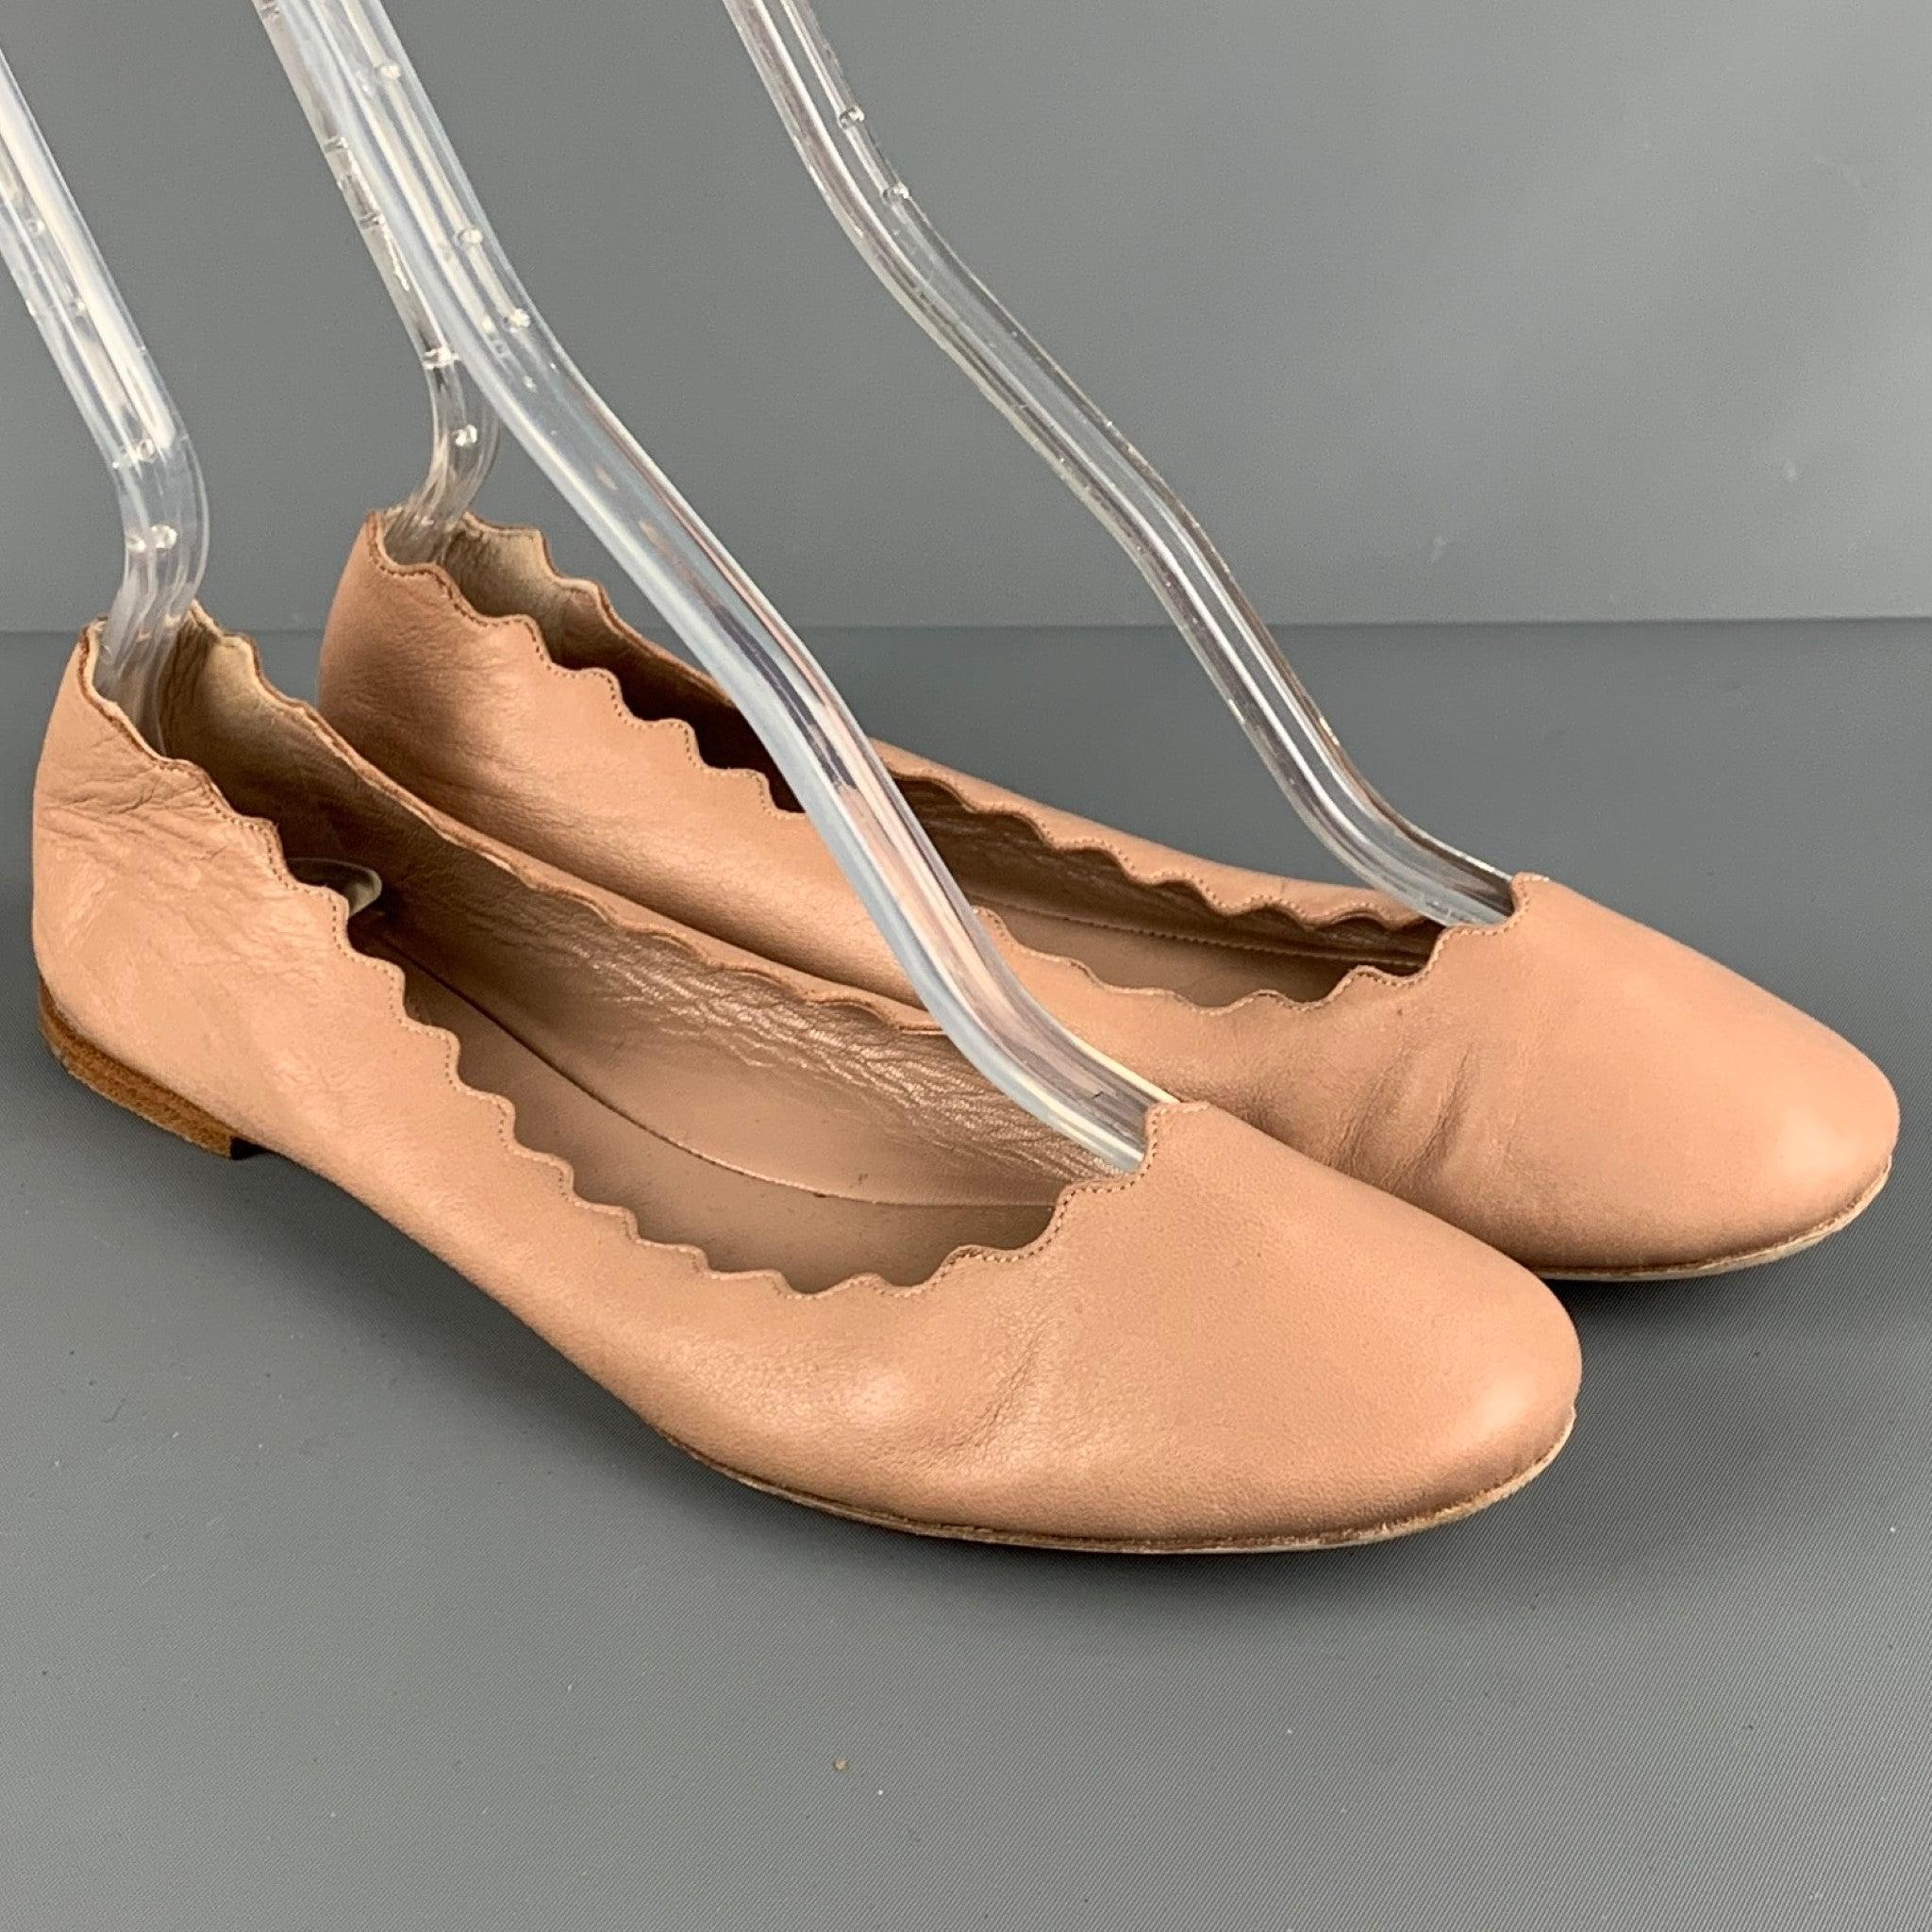 CHLOE LAUREN flats comes in a beige leather featuring a ballerina style, scalloped edges, and 0.3